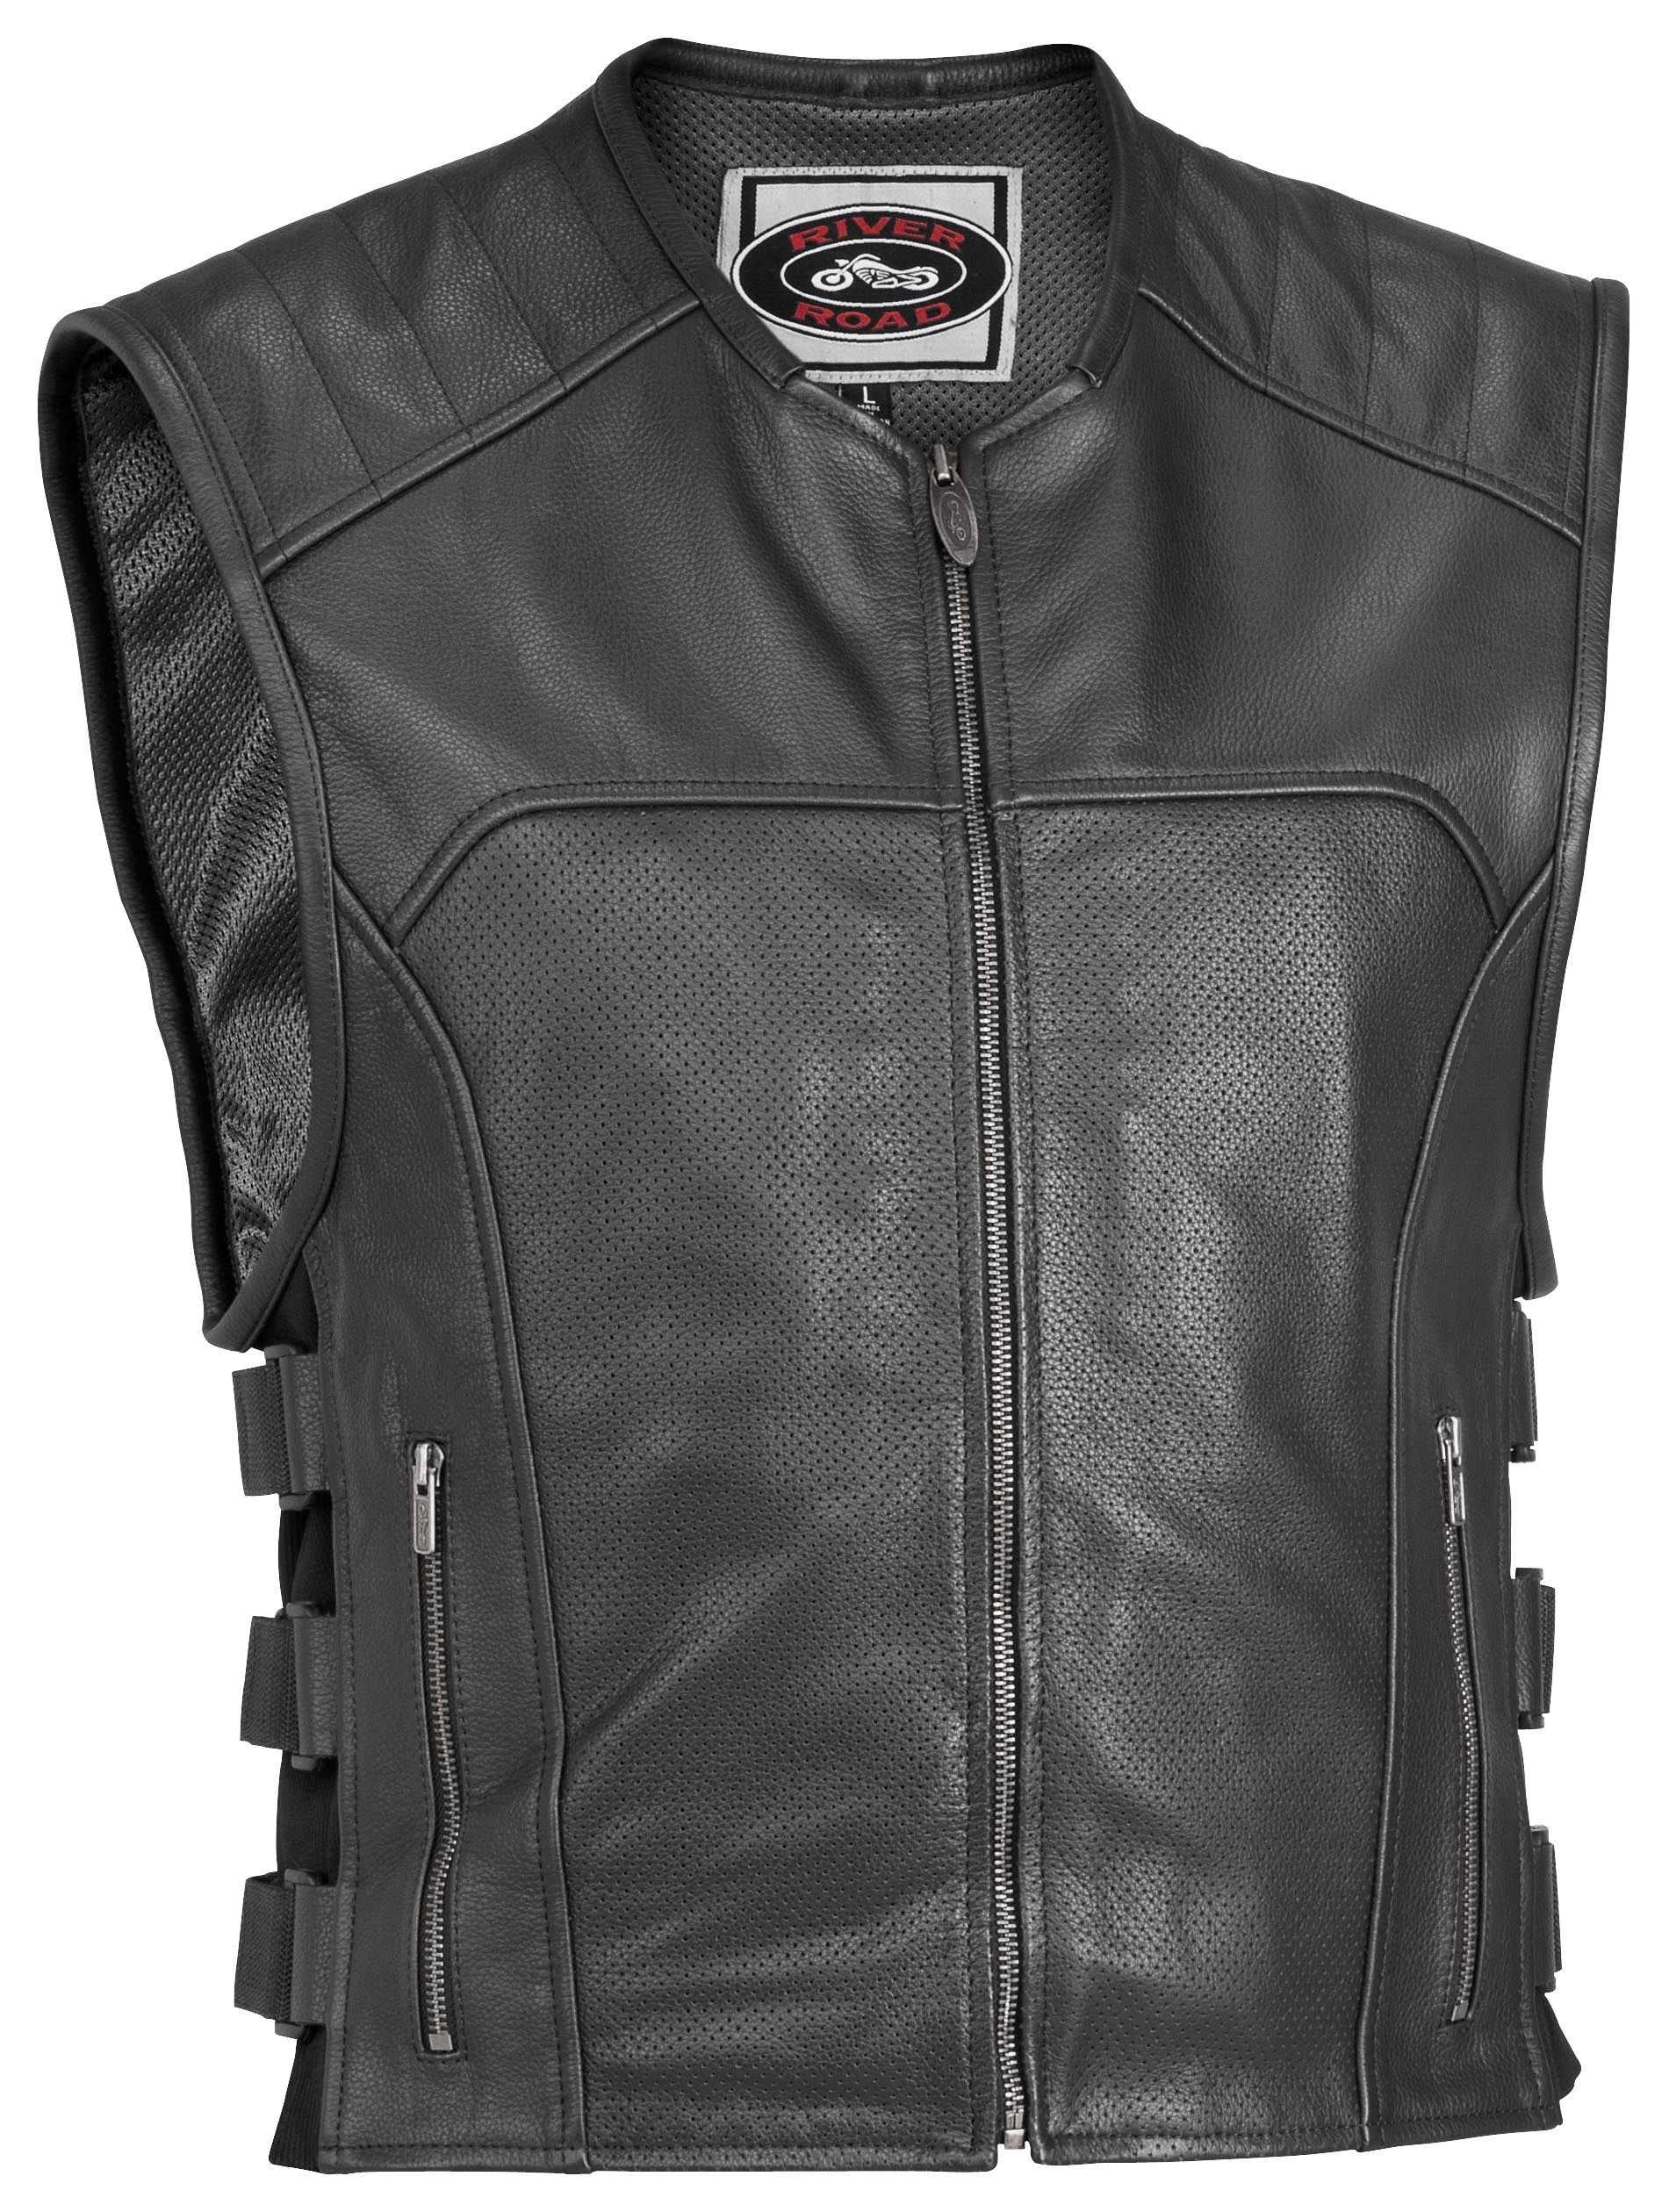 river road ruffian perforated leather vest - revzilla DIJBHAC